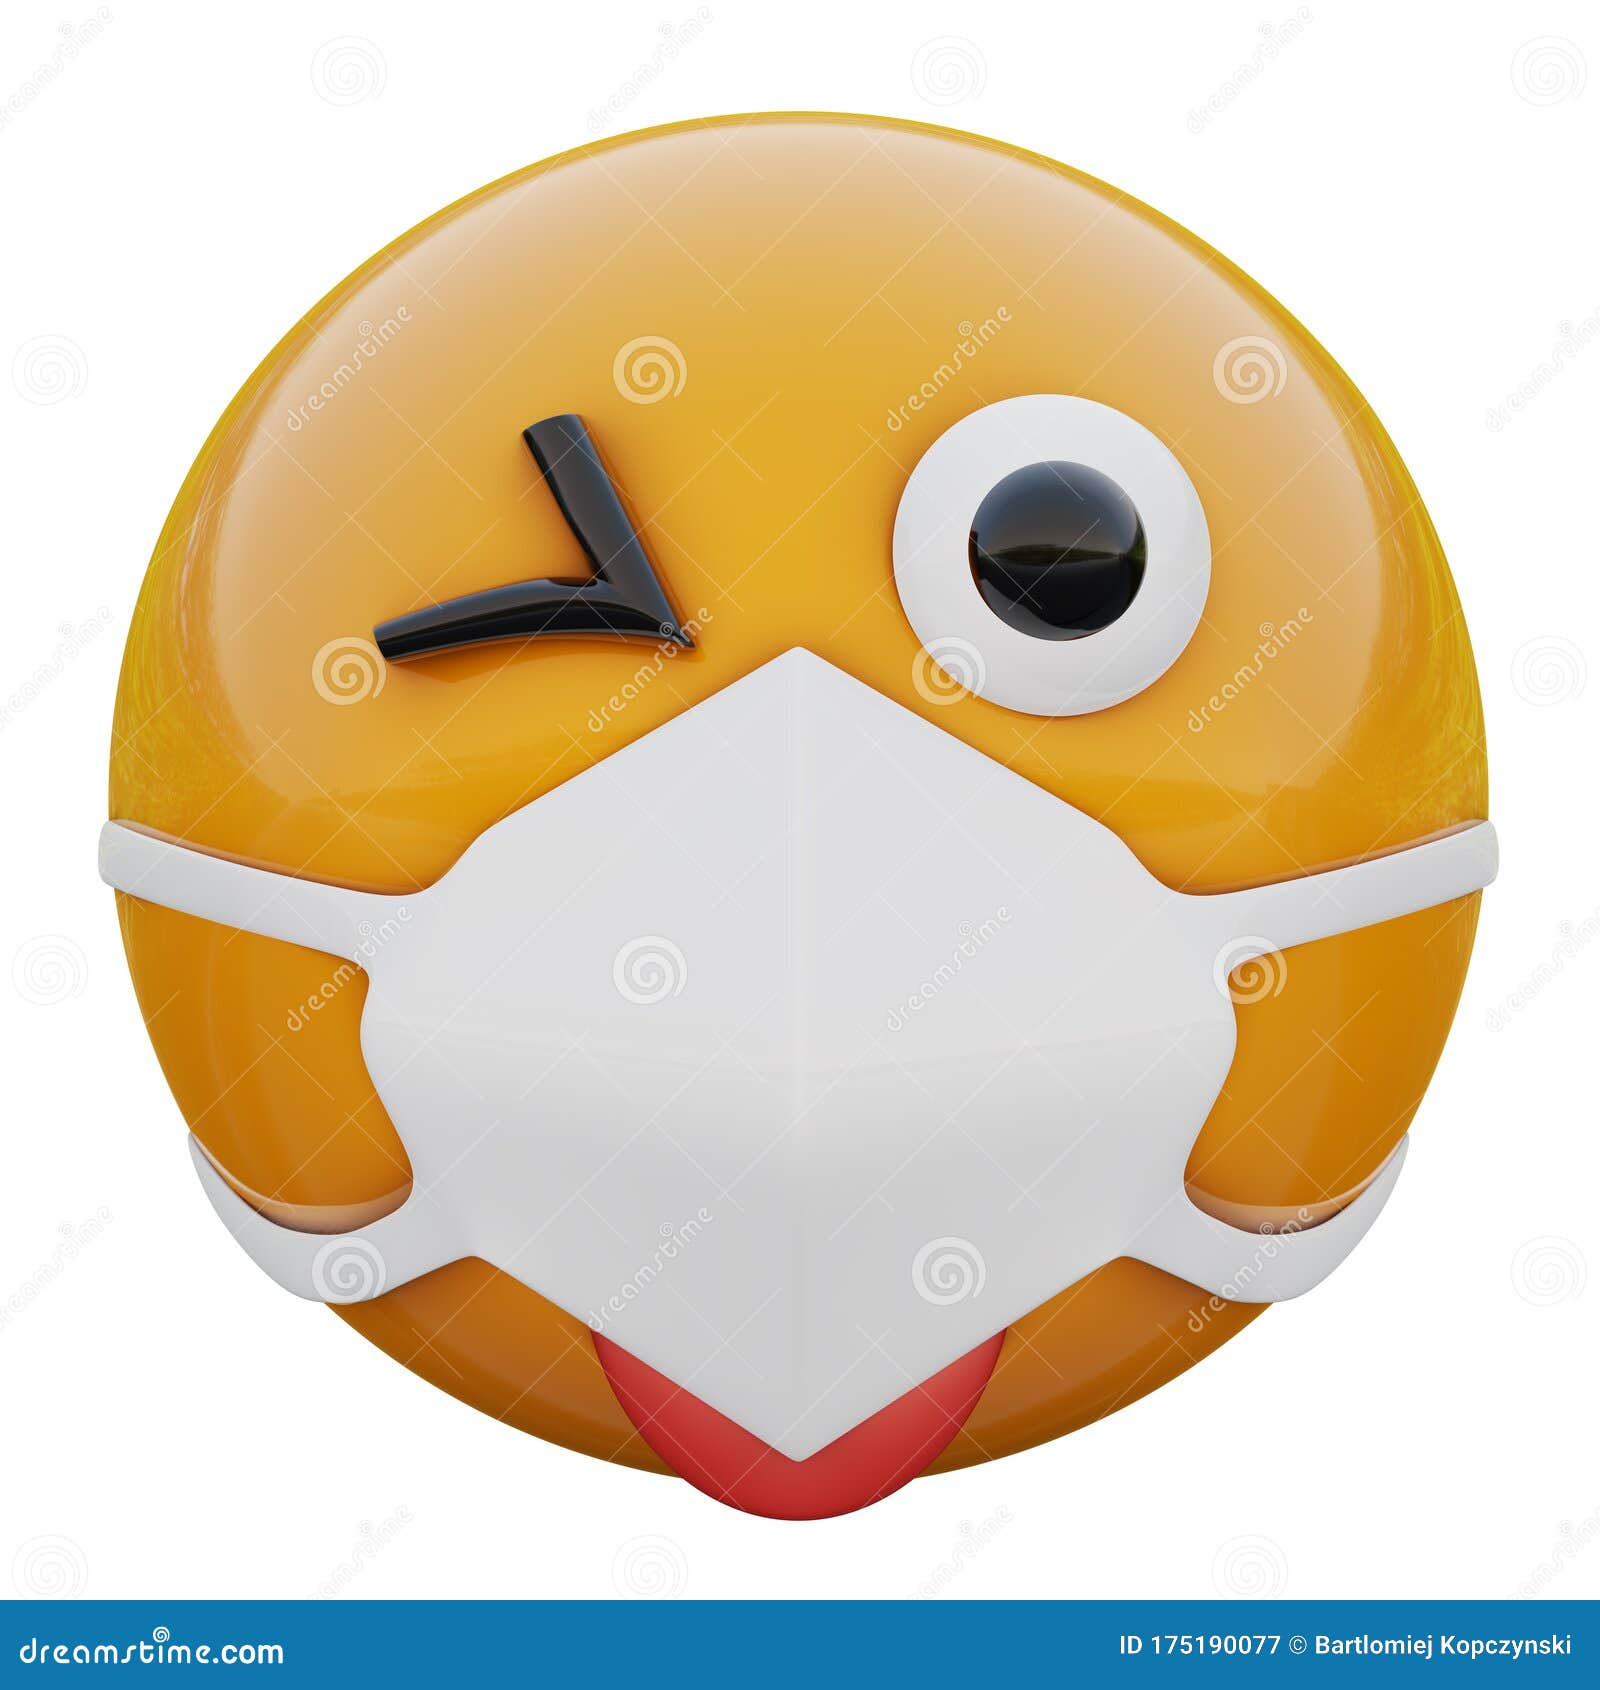 Download 3d Render Of Cheeky And Playful Yellow Emoji Face In Medical Mask Protecting From Coronavirus 2019 Ncov Stock Illustration Illustration Of Icon Infection 175190077 PSD Mockup Templates